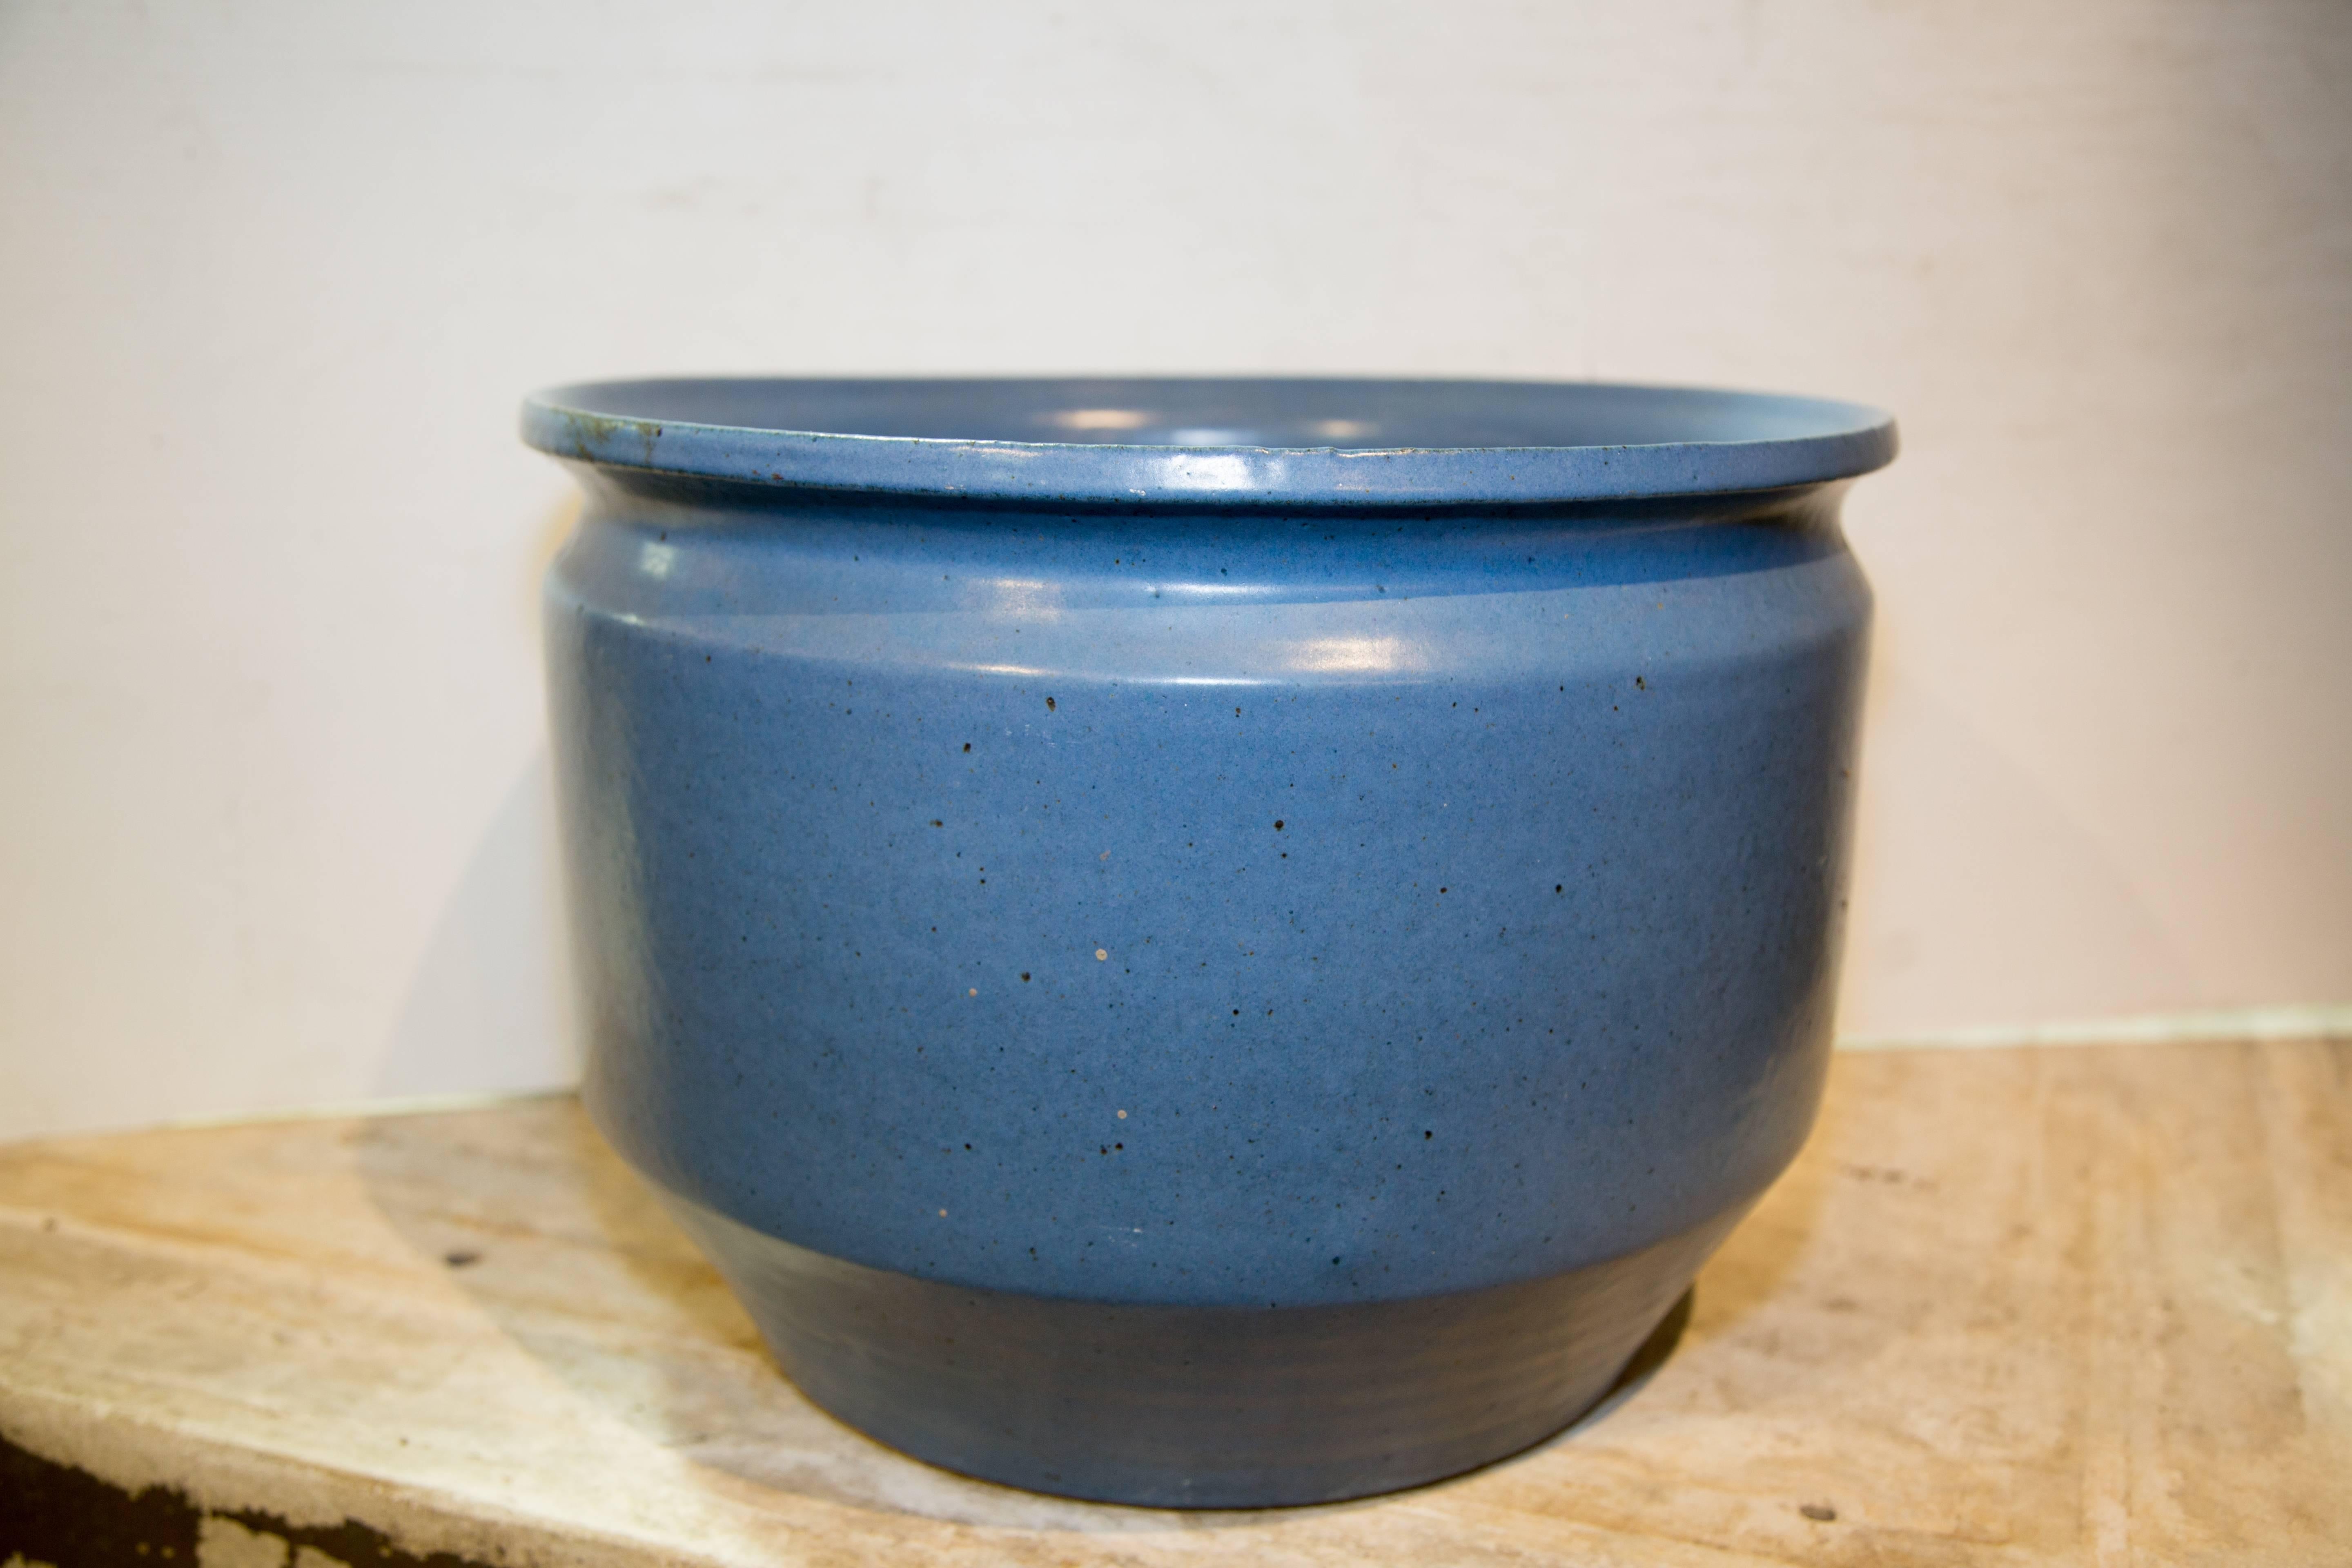 Small blue glazed planter by Earth Gender.
Mid-Century Modern,
California,
1970.
Measures: 16” D x 11.5” H.
$3,750.00.